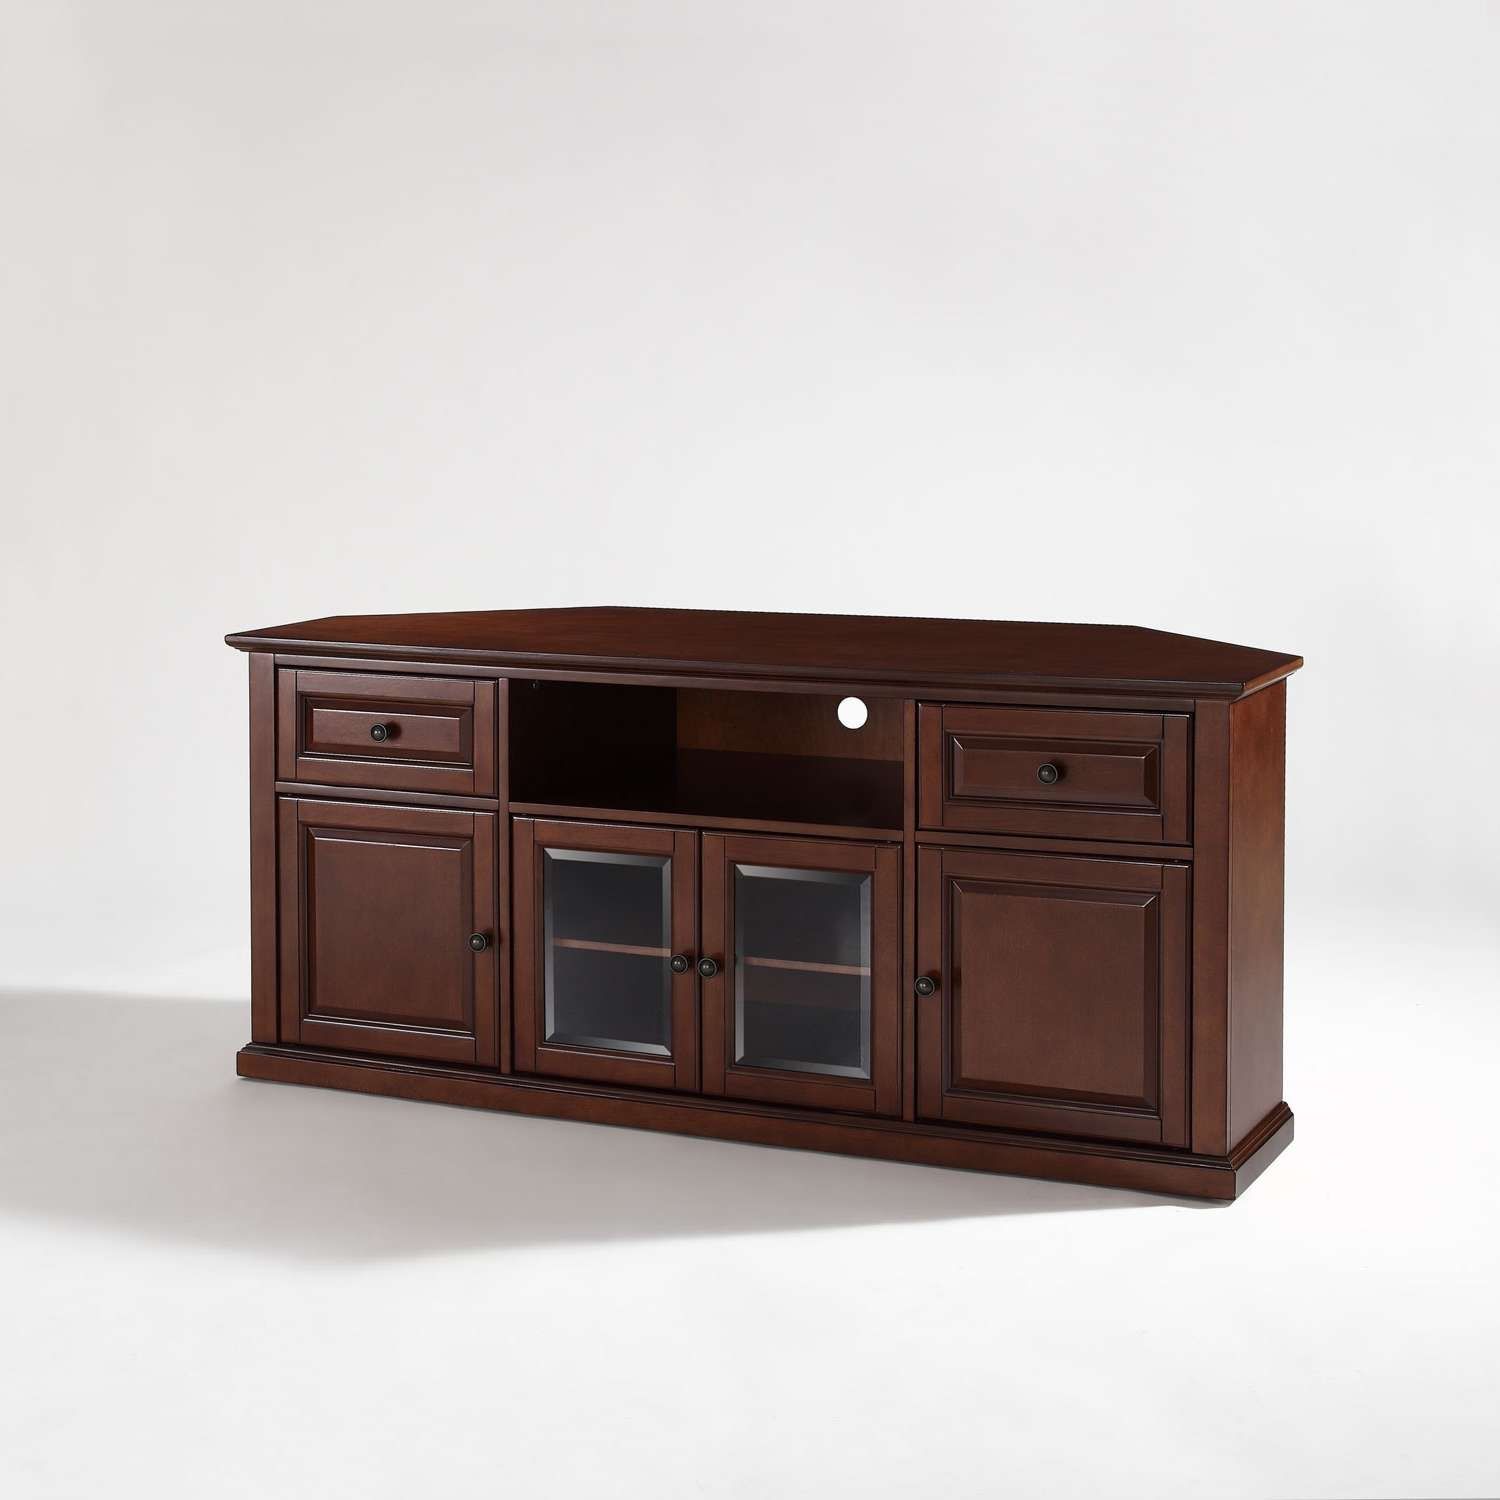 60 Inch Corner Tv Stand In Vintage Mahogany Crosley Furniture Inside Tv Cabinets Corner Units (View 1 of 20)